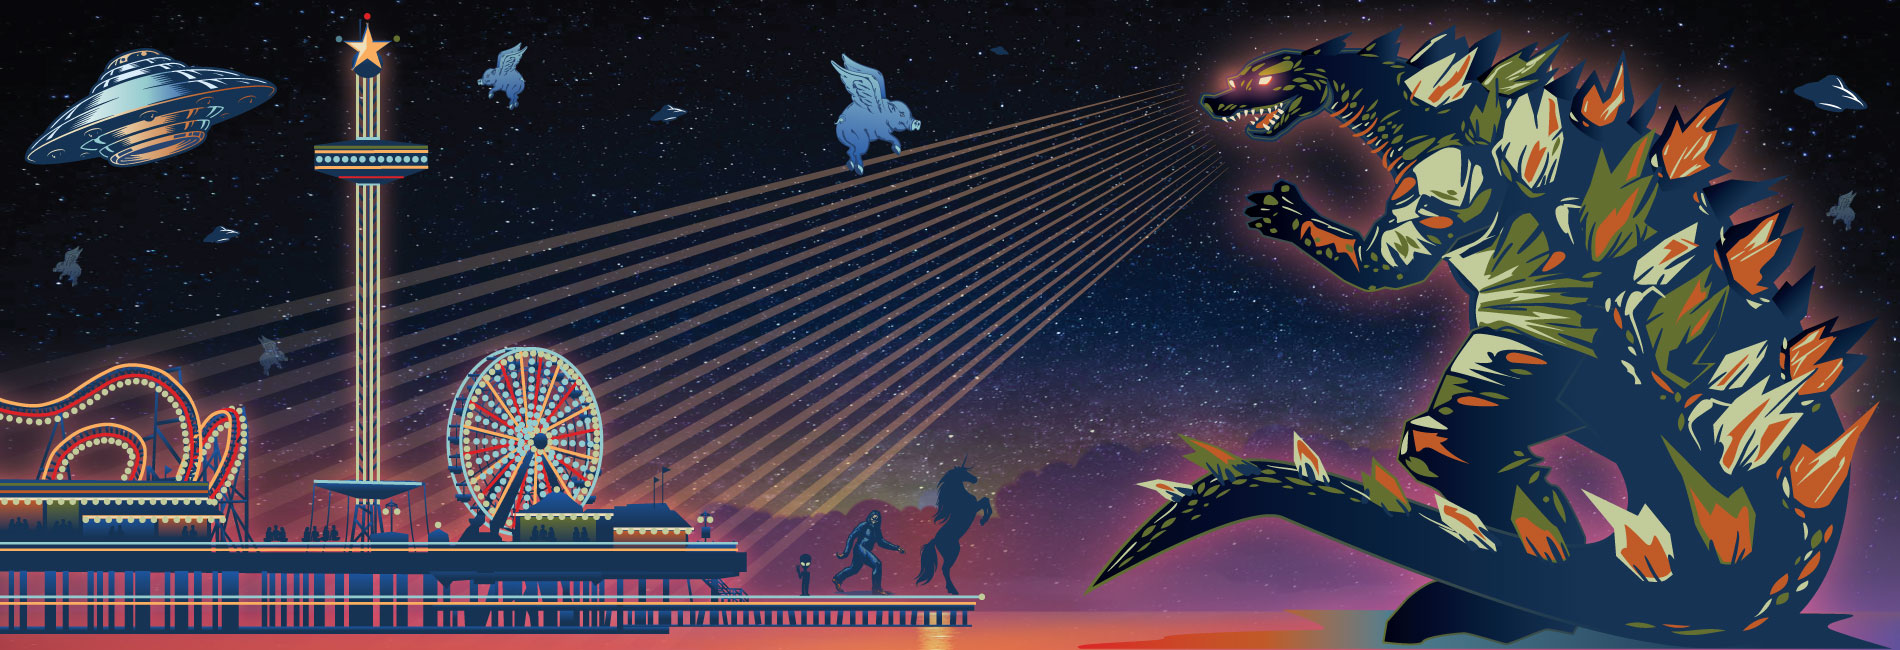 Web banner of Godzilla honing in on the Pleasure Pier for SECC 2021: Anything is Possible charitable campaign